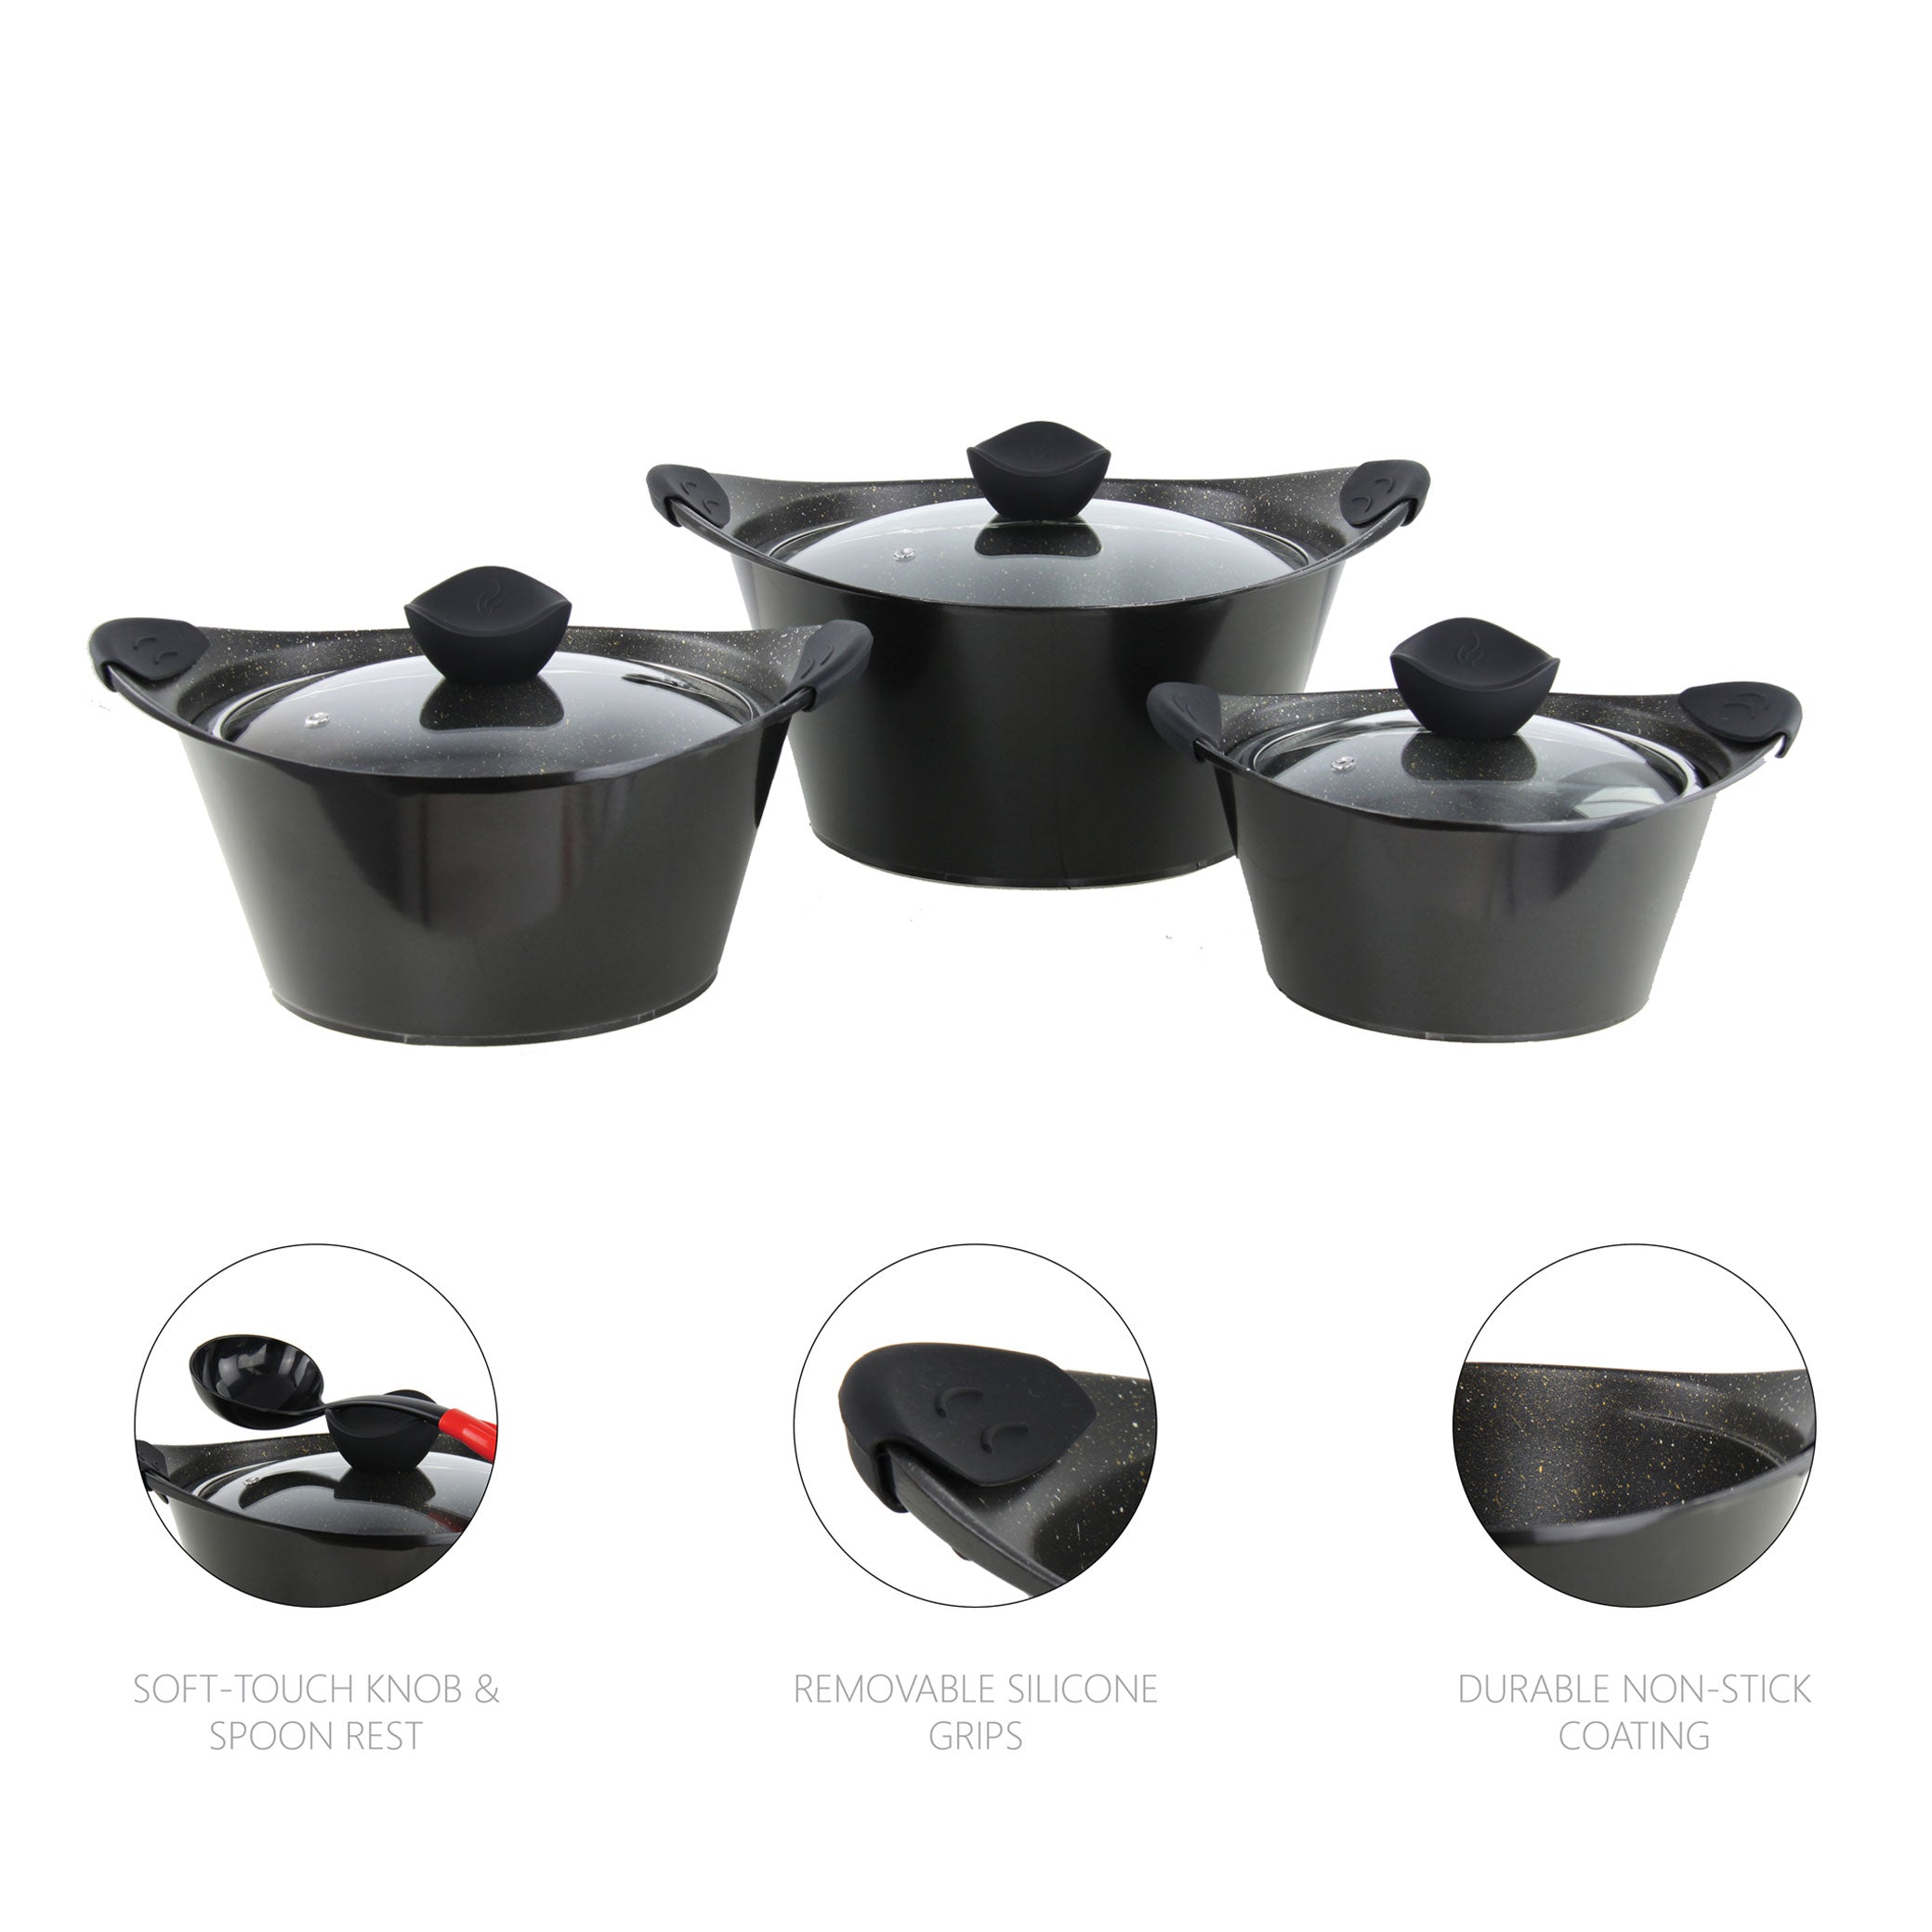 Marble Stockpots With Induction - CAIA - Black - 3 Pcs Set